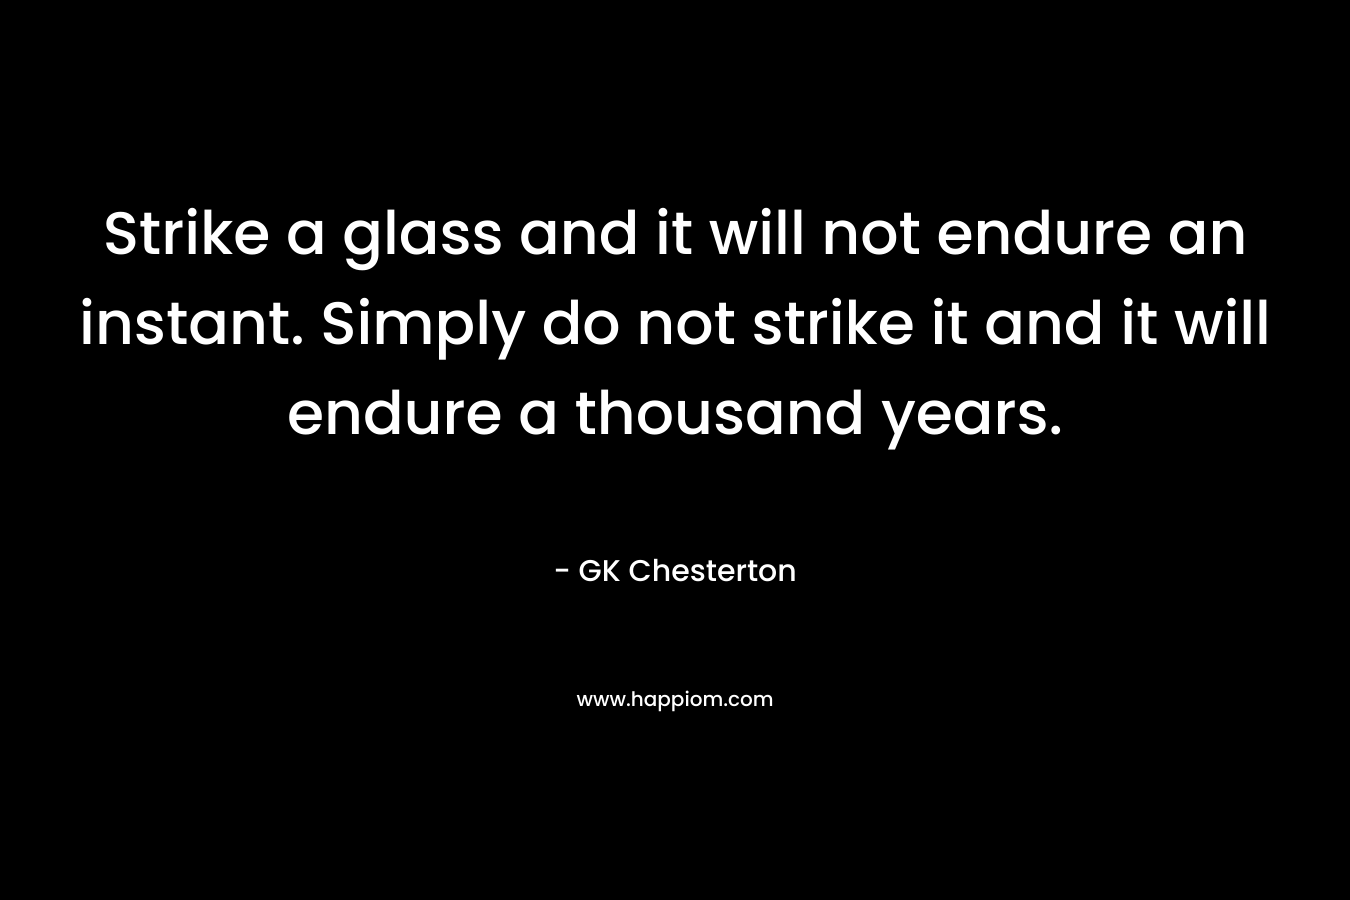 Strike a glass and it will not endure an instant. Simply do not strike it and it will endure a thousand years.